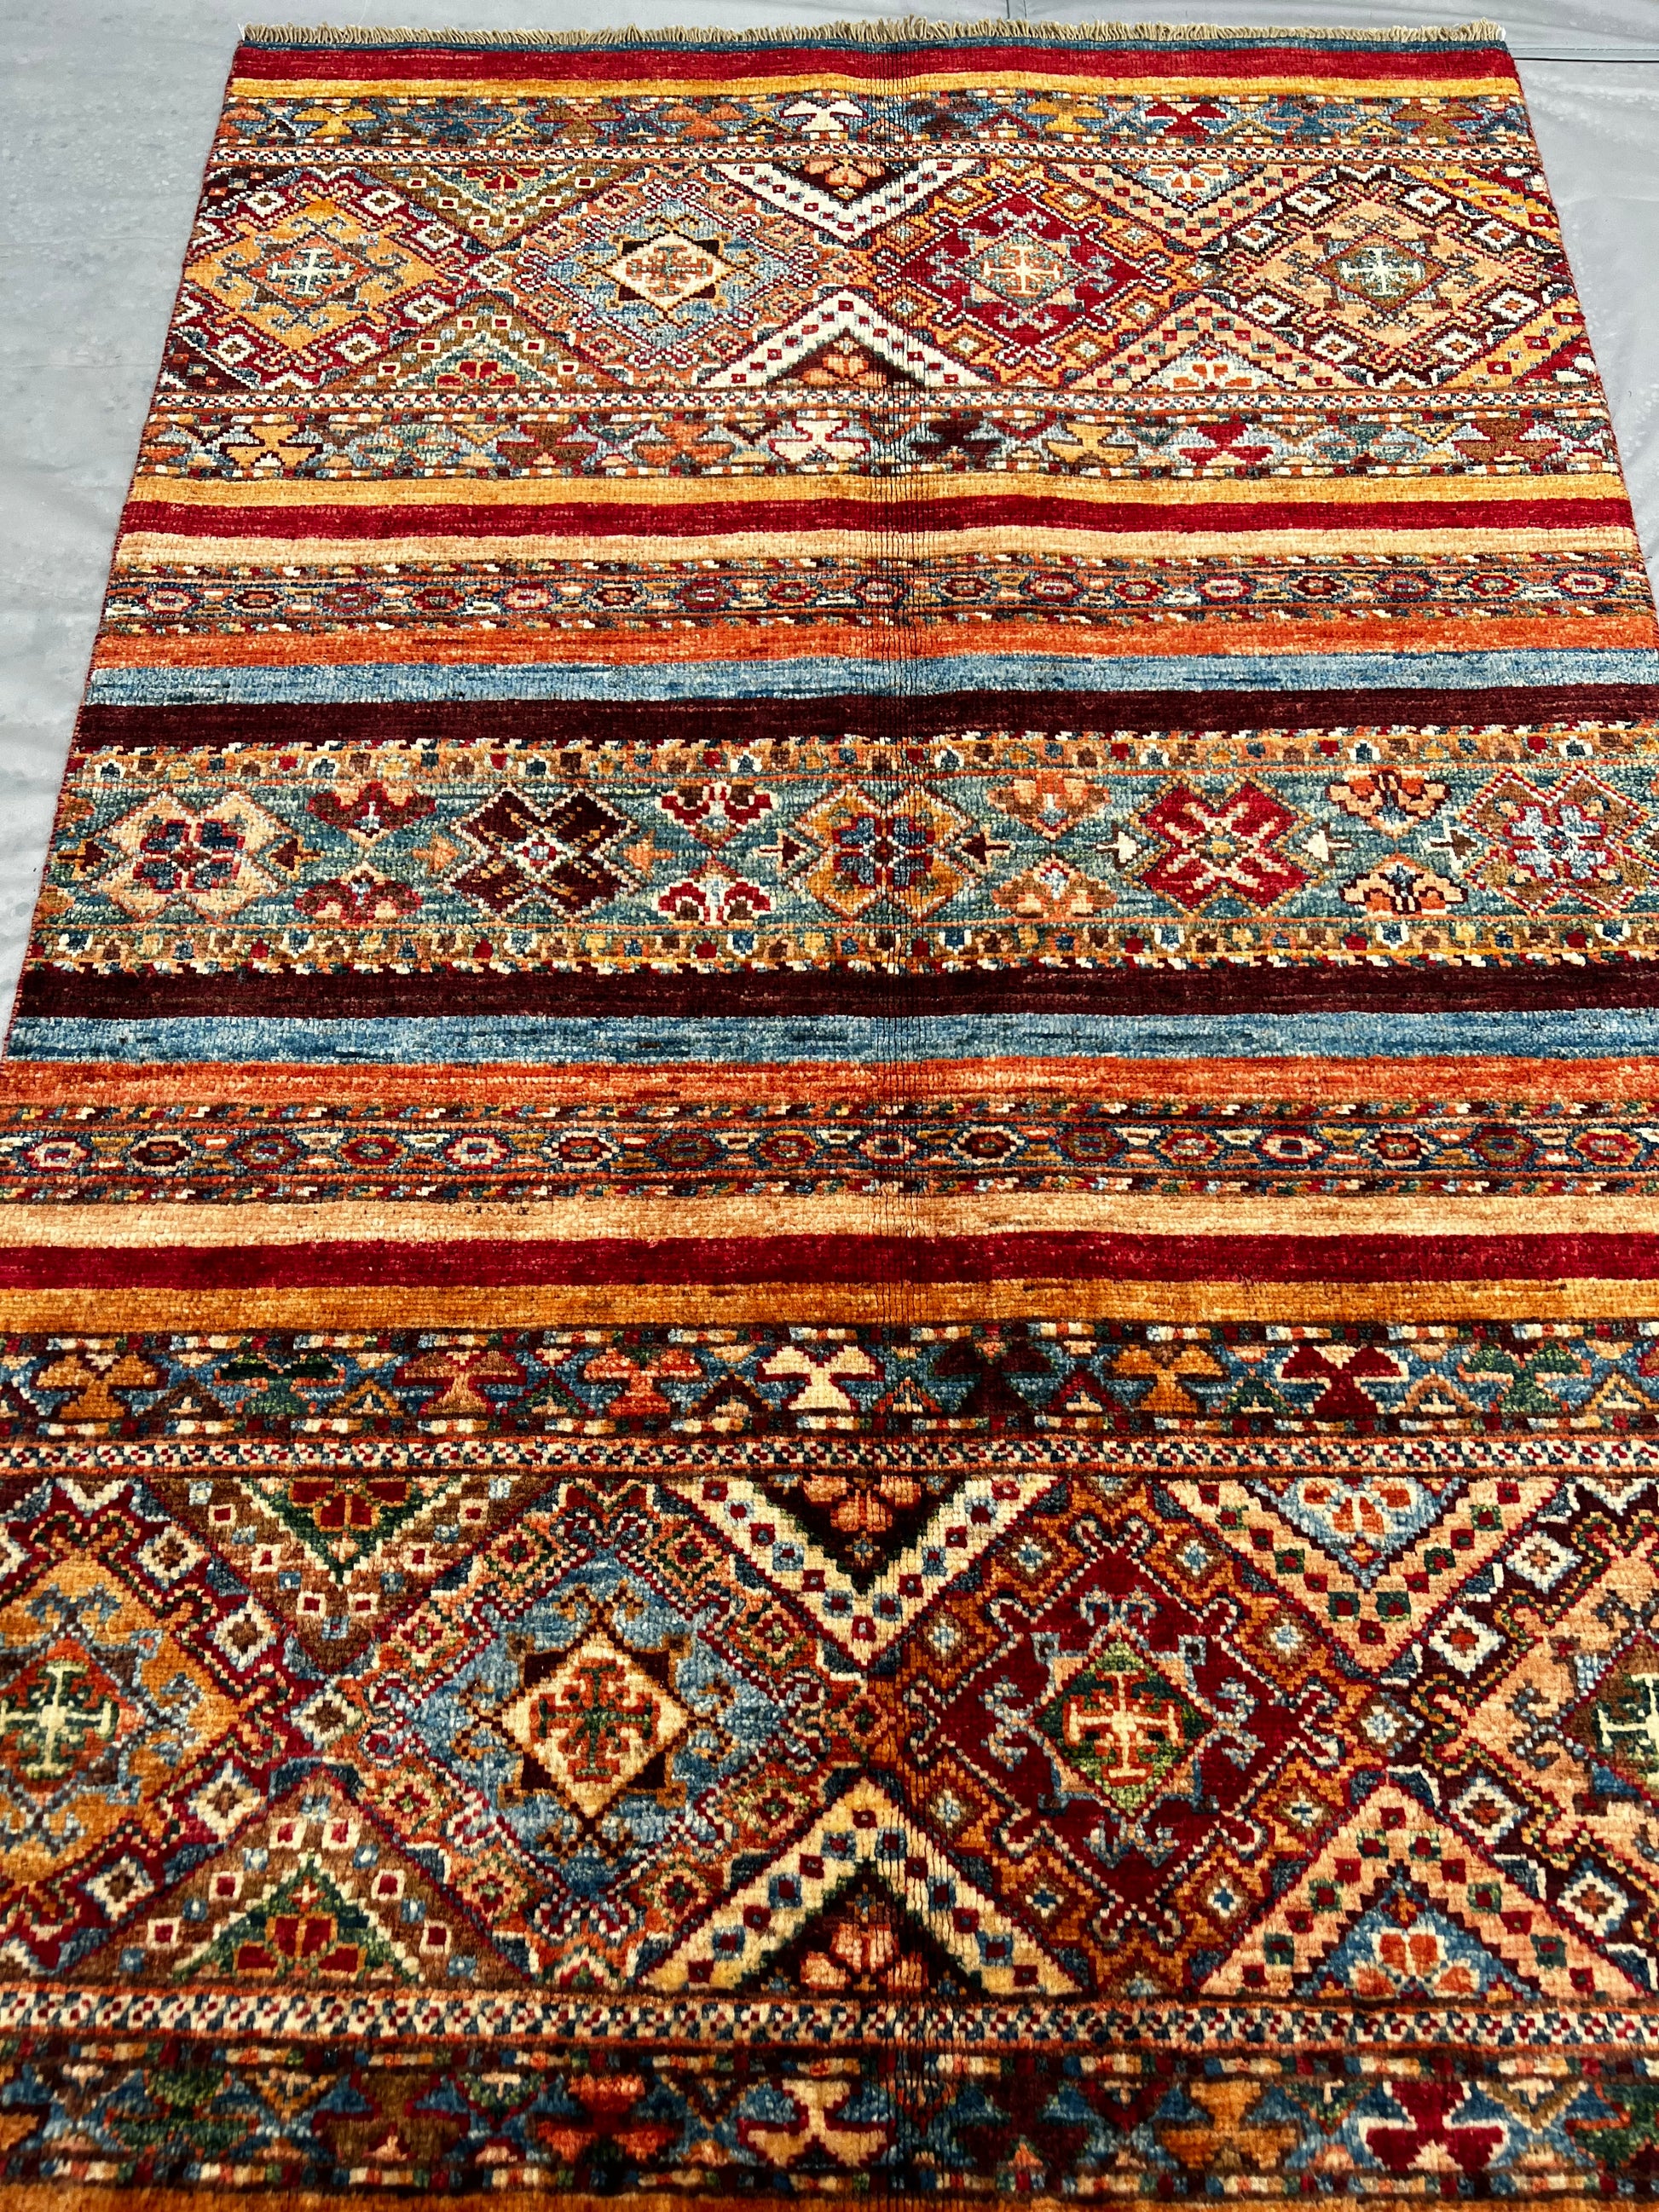 Afghan Hand Knotted/ Knitted Living Room/Dining Room Chob Rang(Shawl Design) Area Rug 4.1ftx2.7ft (CH-M-4.17X2.79-4-N) (Kabul) - Kabul Rugs